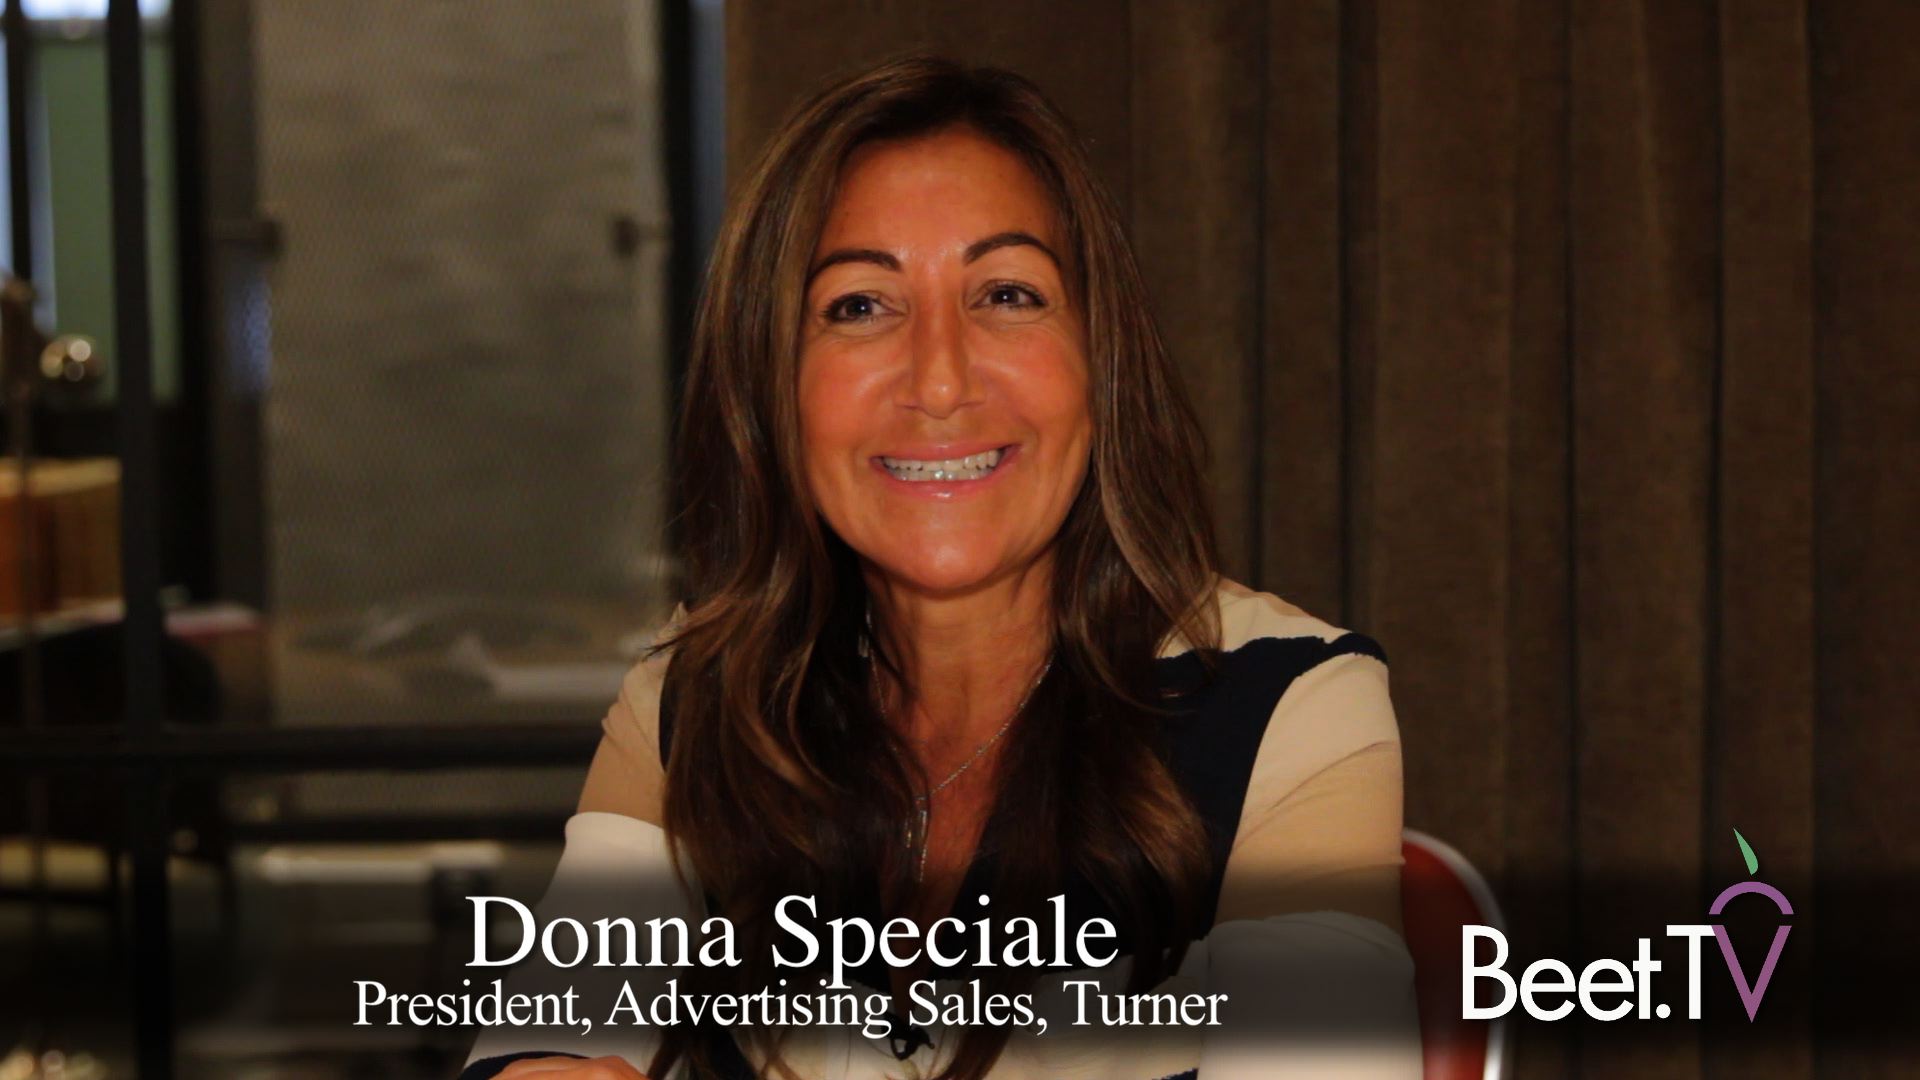 Donna Speciale - President, Advertising Sales & Marketing at